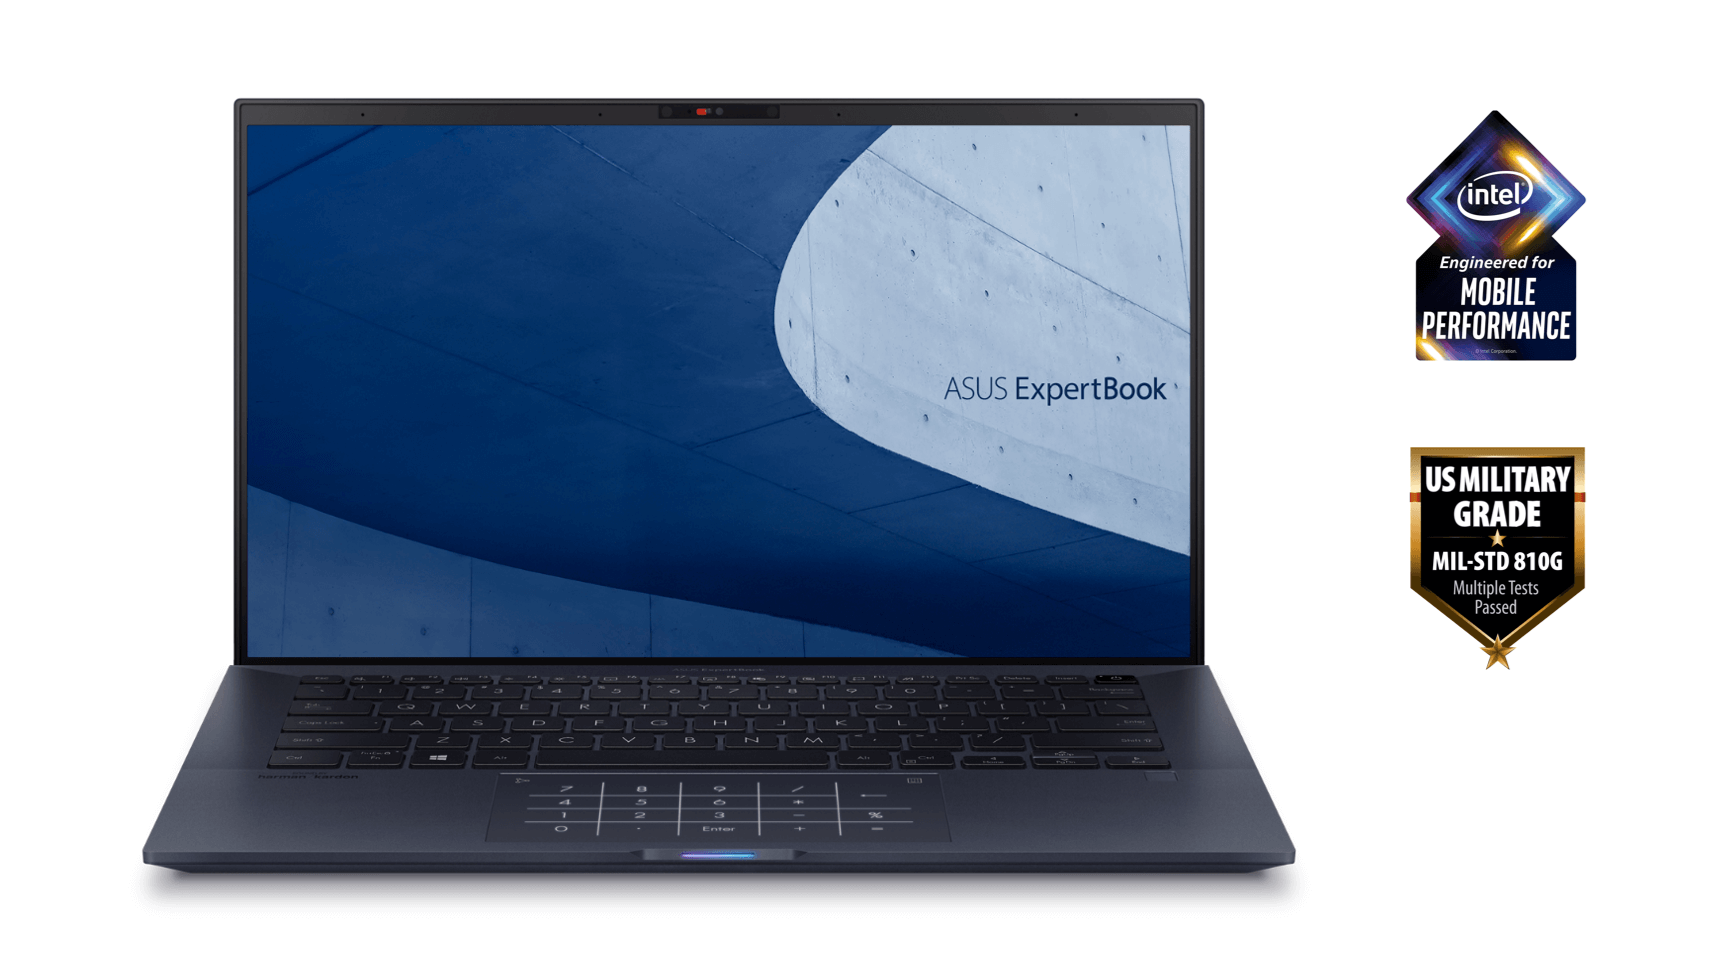 ASUS ExpertBook B9450 Laptop with Intel engineered for mobile performance badge and US Military grade badge